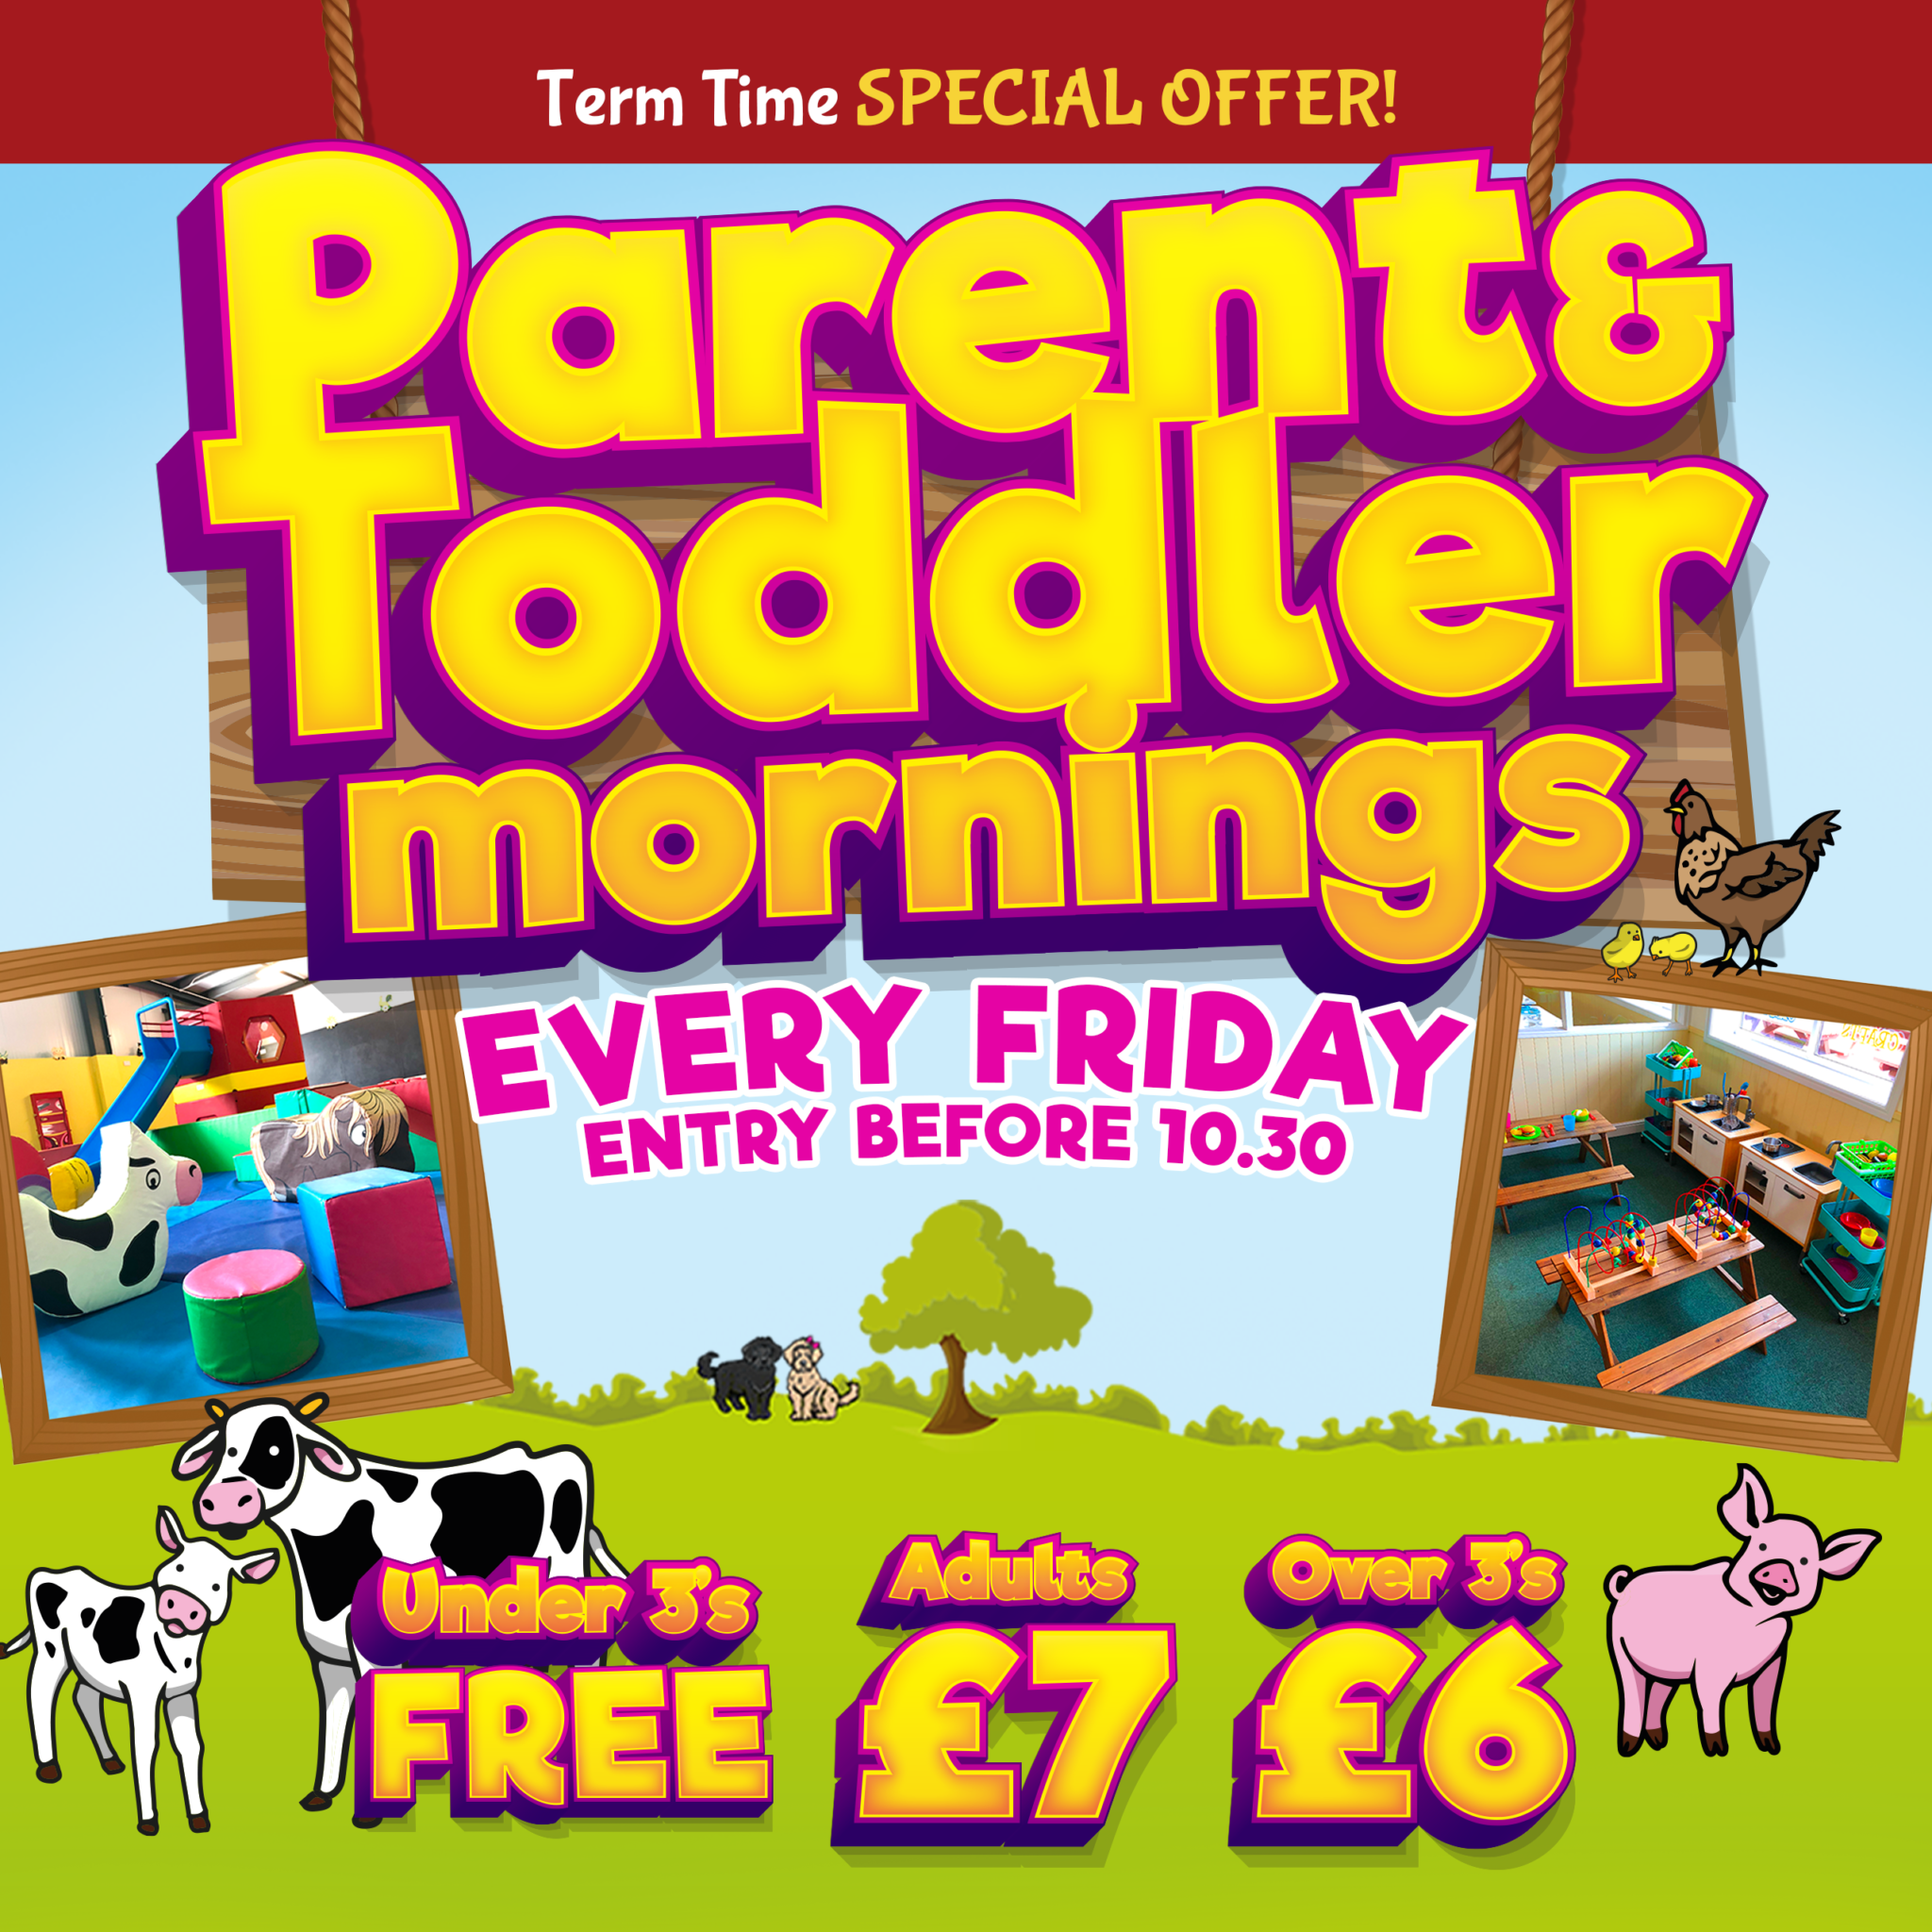 Hardy's Animal Farm - A great family day out! Ingoldmells, Skegness